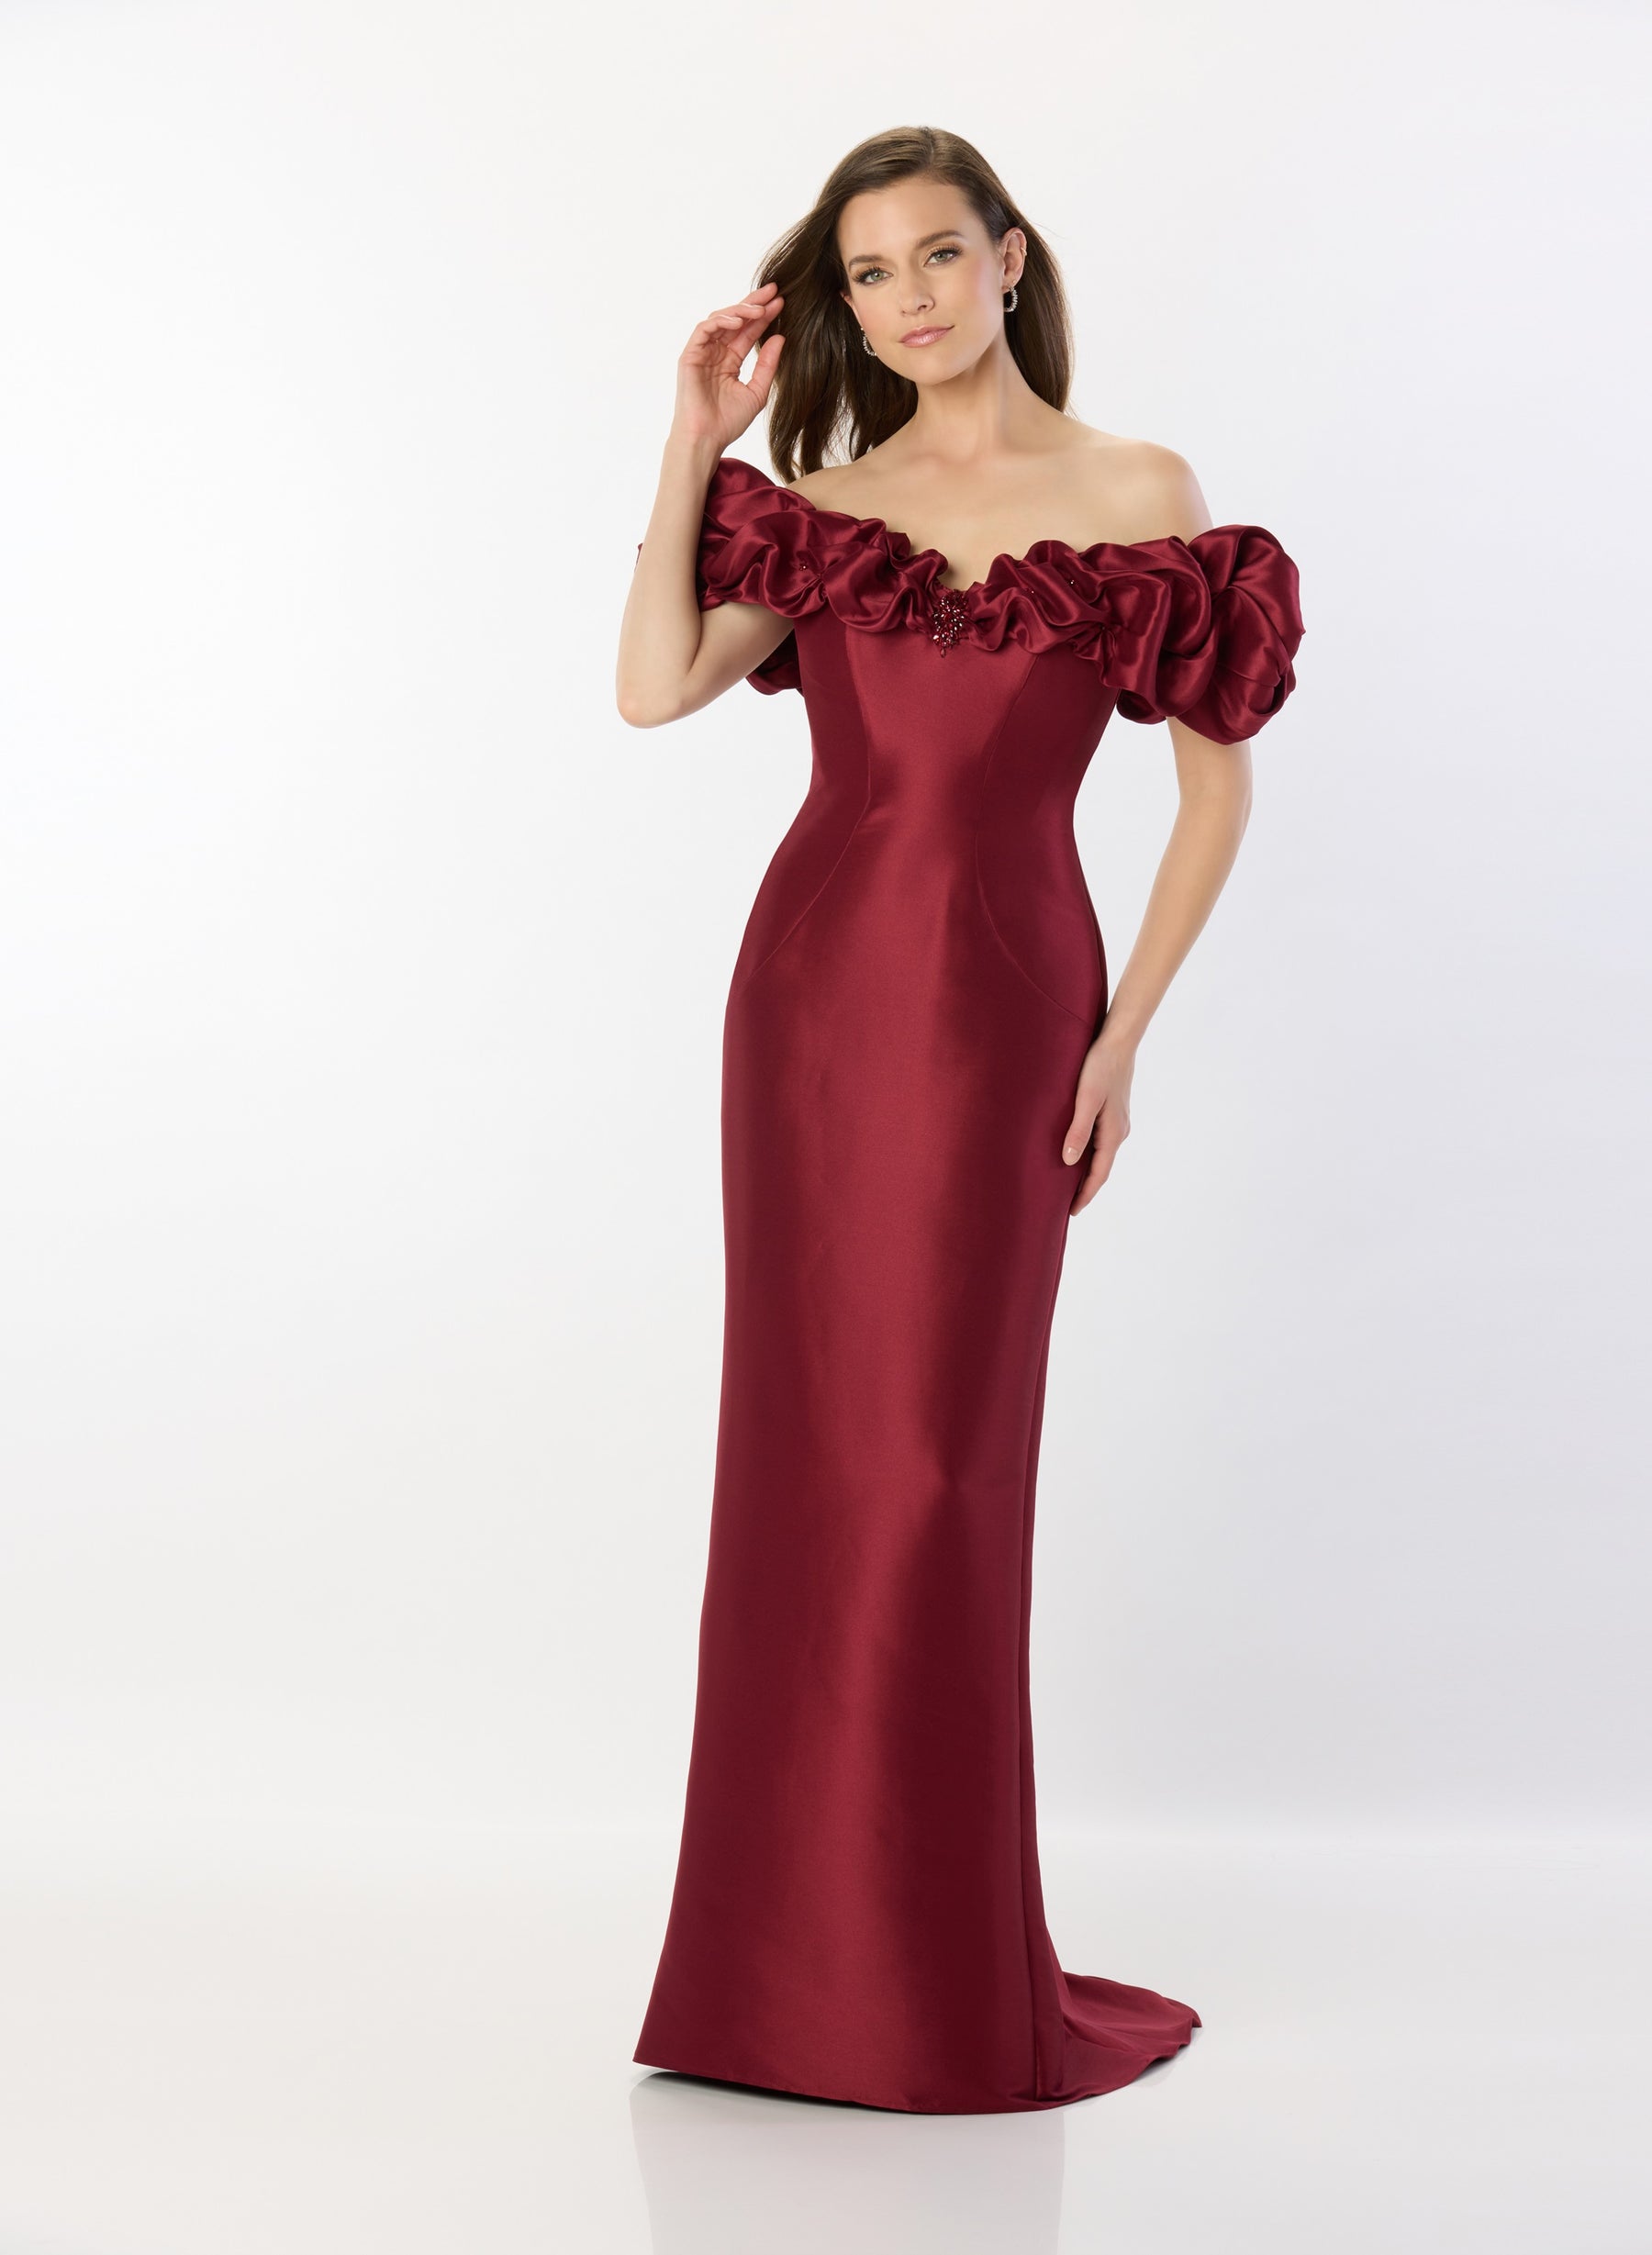 Ruffle Off Shoulder Gown with Bead Accents